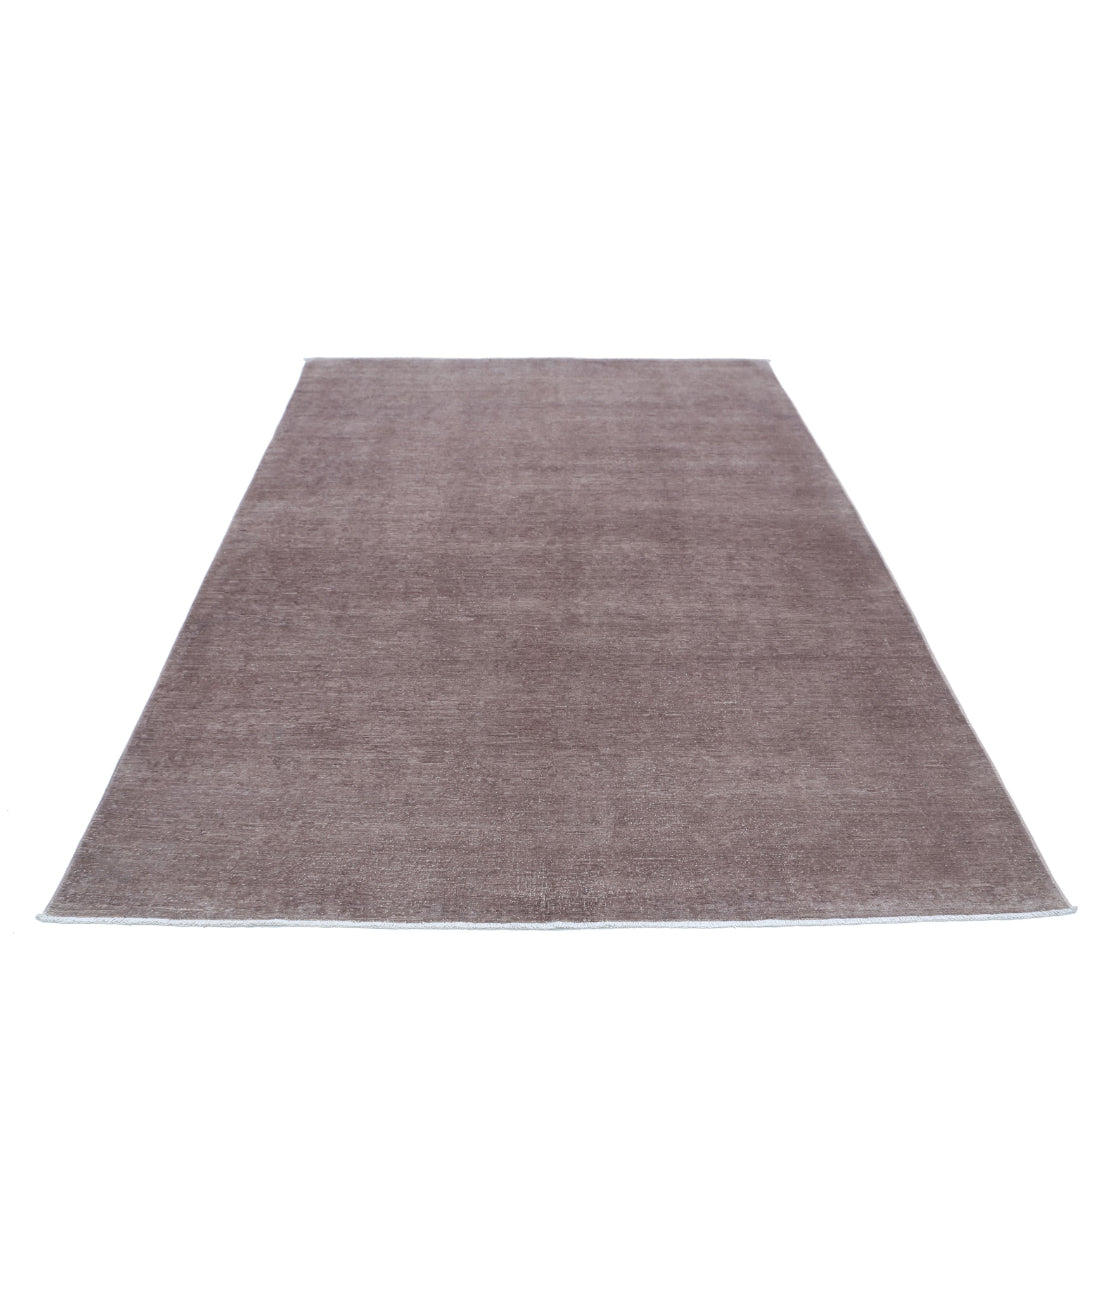 Hand Knotted Overdye Wool Rug - 6'1'' x 8'4'' 6'1'' x 8'4'' (183 X 250) / Taupe / Taupe